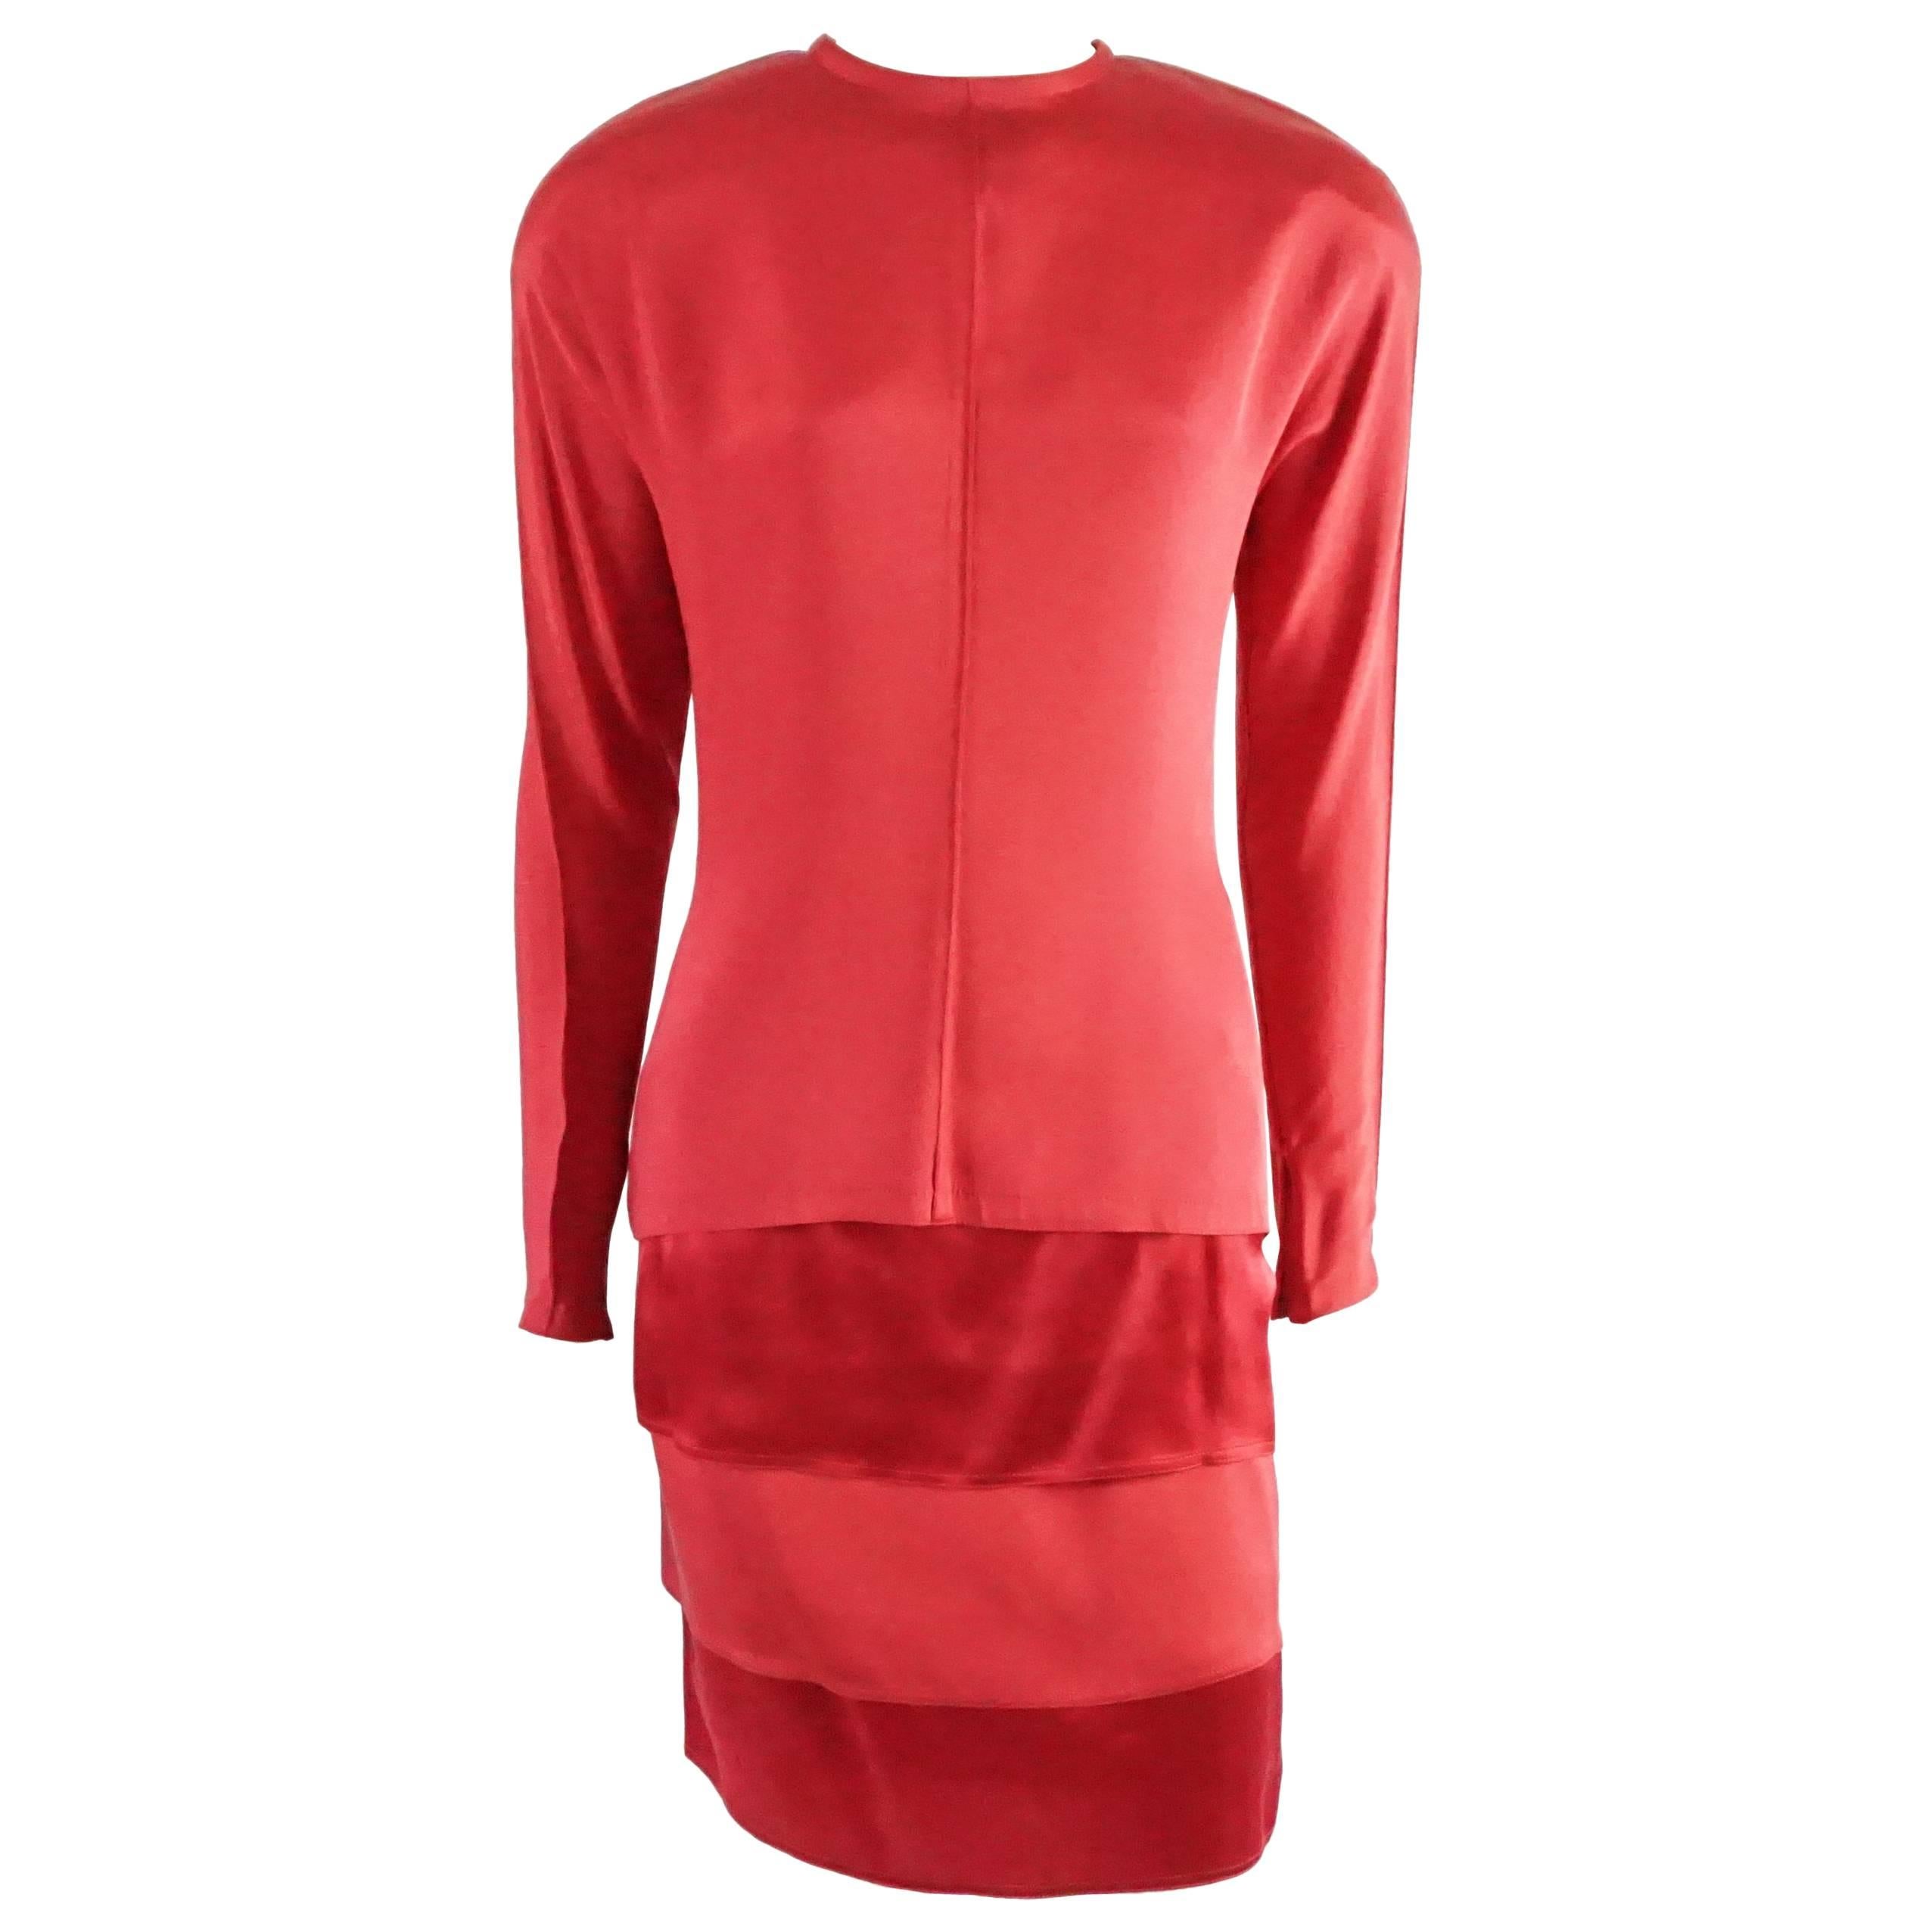 Gianni Versace 1990's Red Silk Skirt Set - 40 For Sale